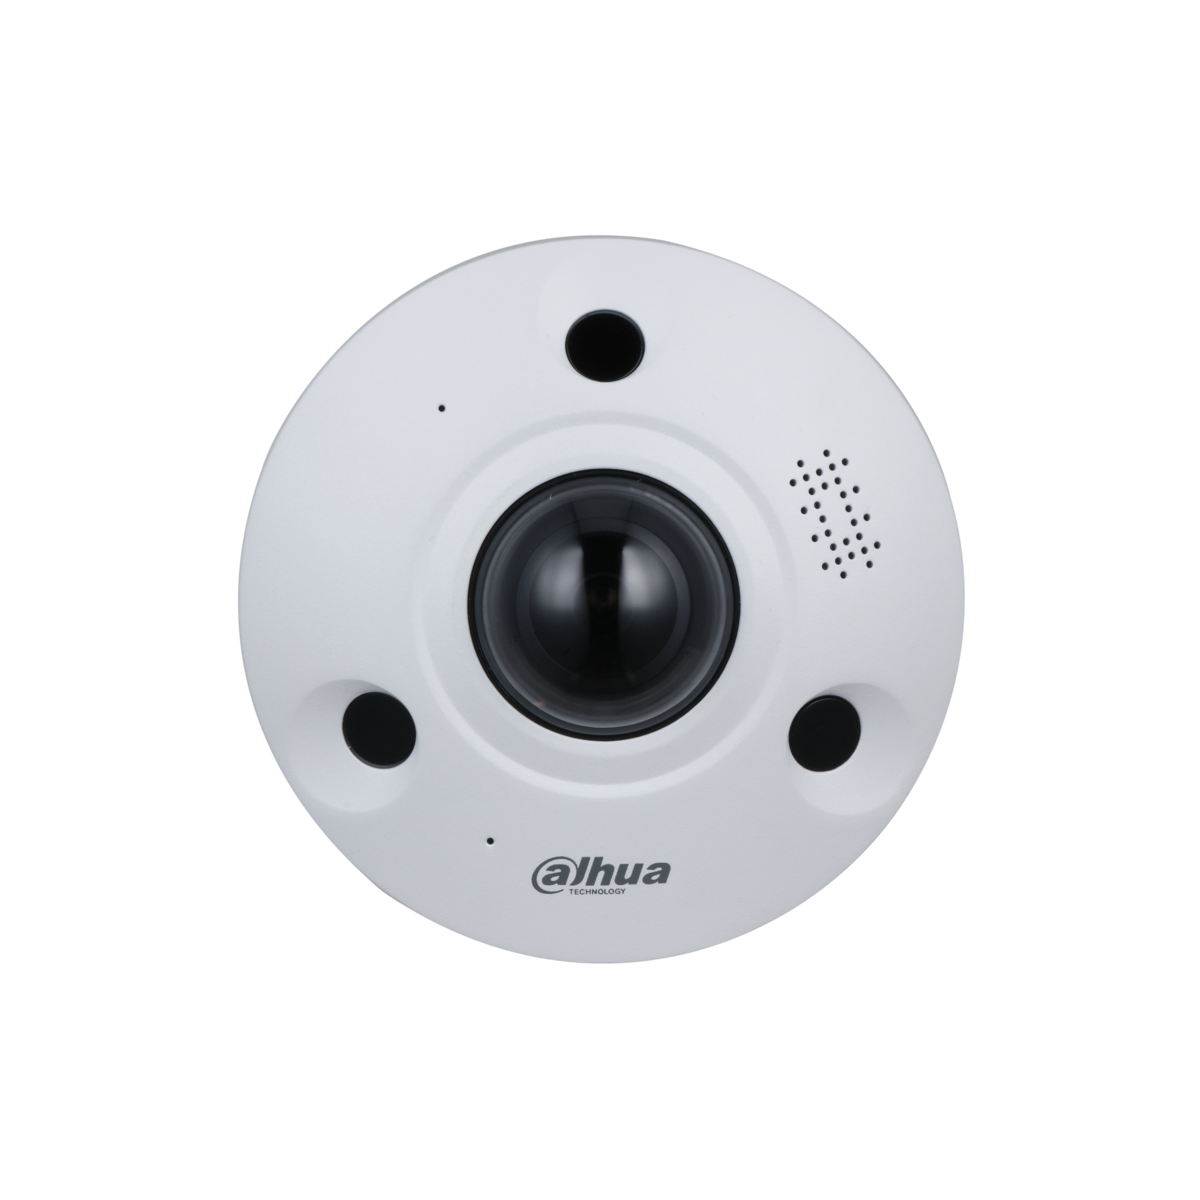 WIZMIND SERIES IP CAMERA WHITE AI 360° PANORAMIC 12MP H.264/4+/5/5+ FISHEYE DIGITAL WDR METAL 1.85MM FIXED LENS IR 10M POE+ IP67 BUILT IN MIC AUDIO IN AUDIO OUT 2 x ALARM IN 2 x ALARM OUT SUPPORT UP TO 256GB SD IK10 12VDC